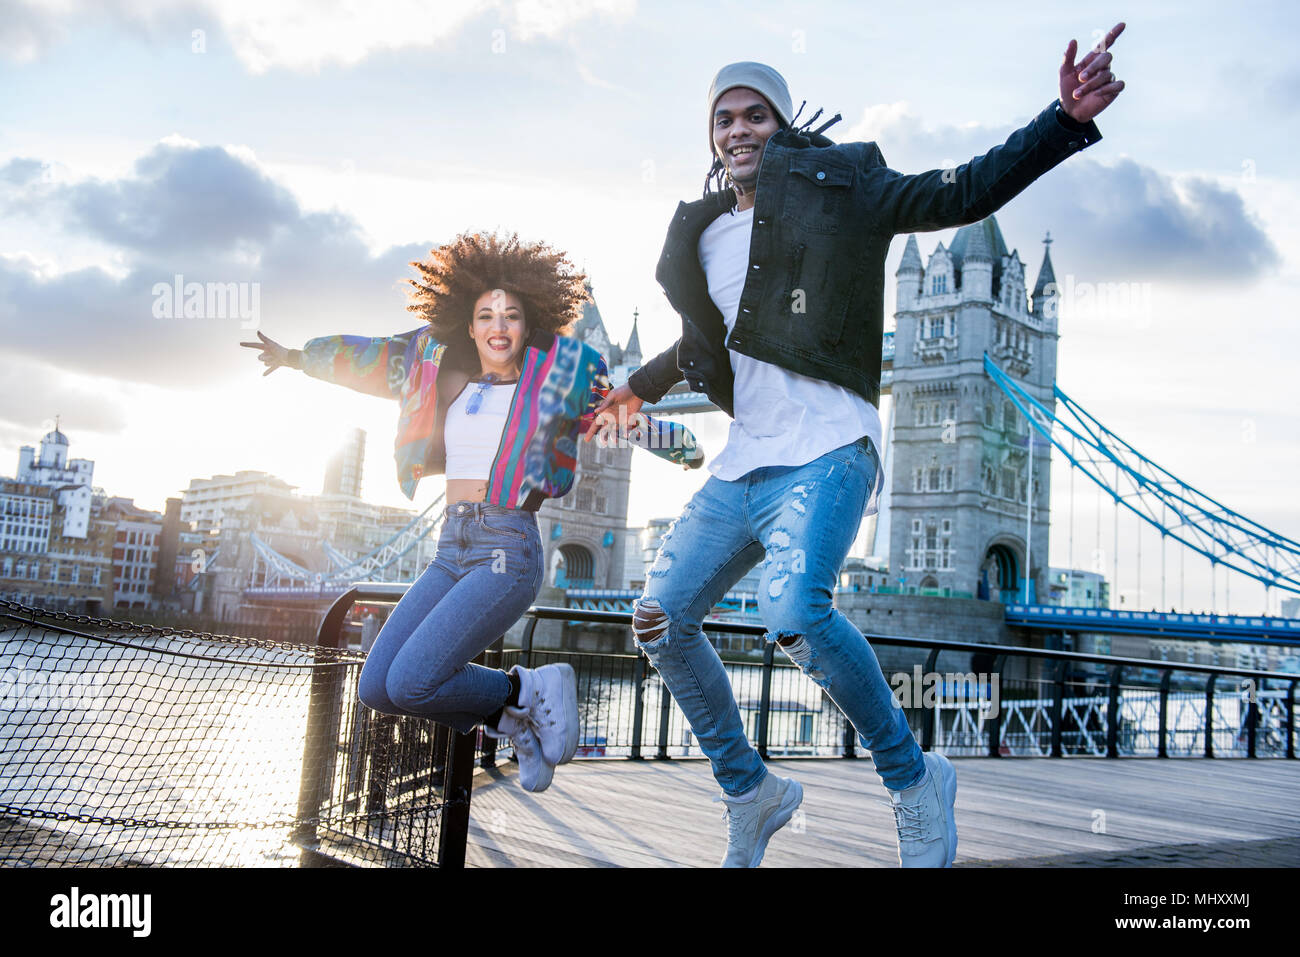 Young couple outdoors, jumping for joy, Tower Bridge in background, London, England, UK Stock Photo